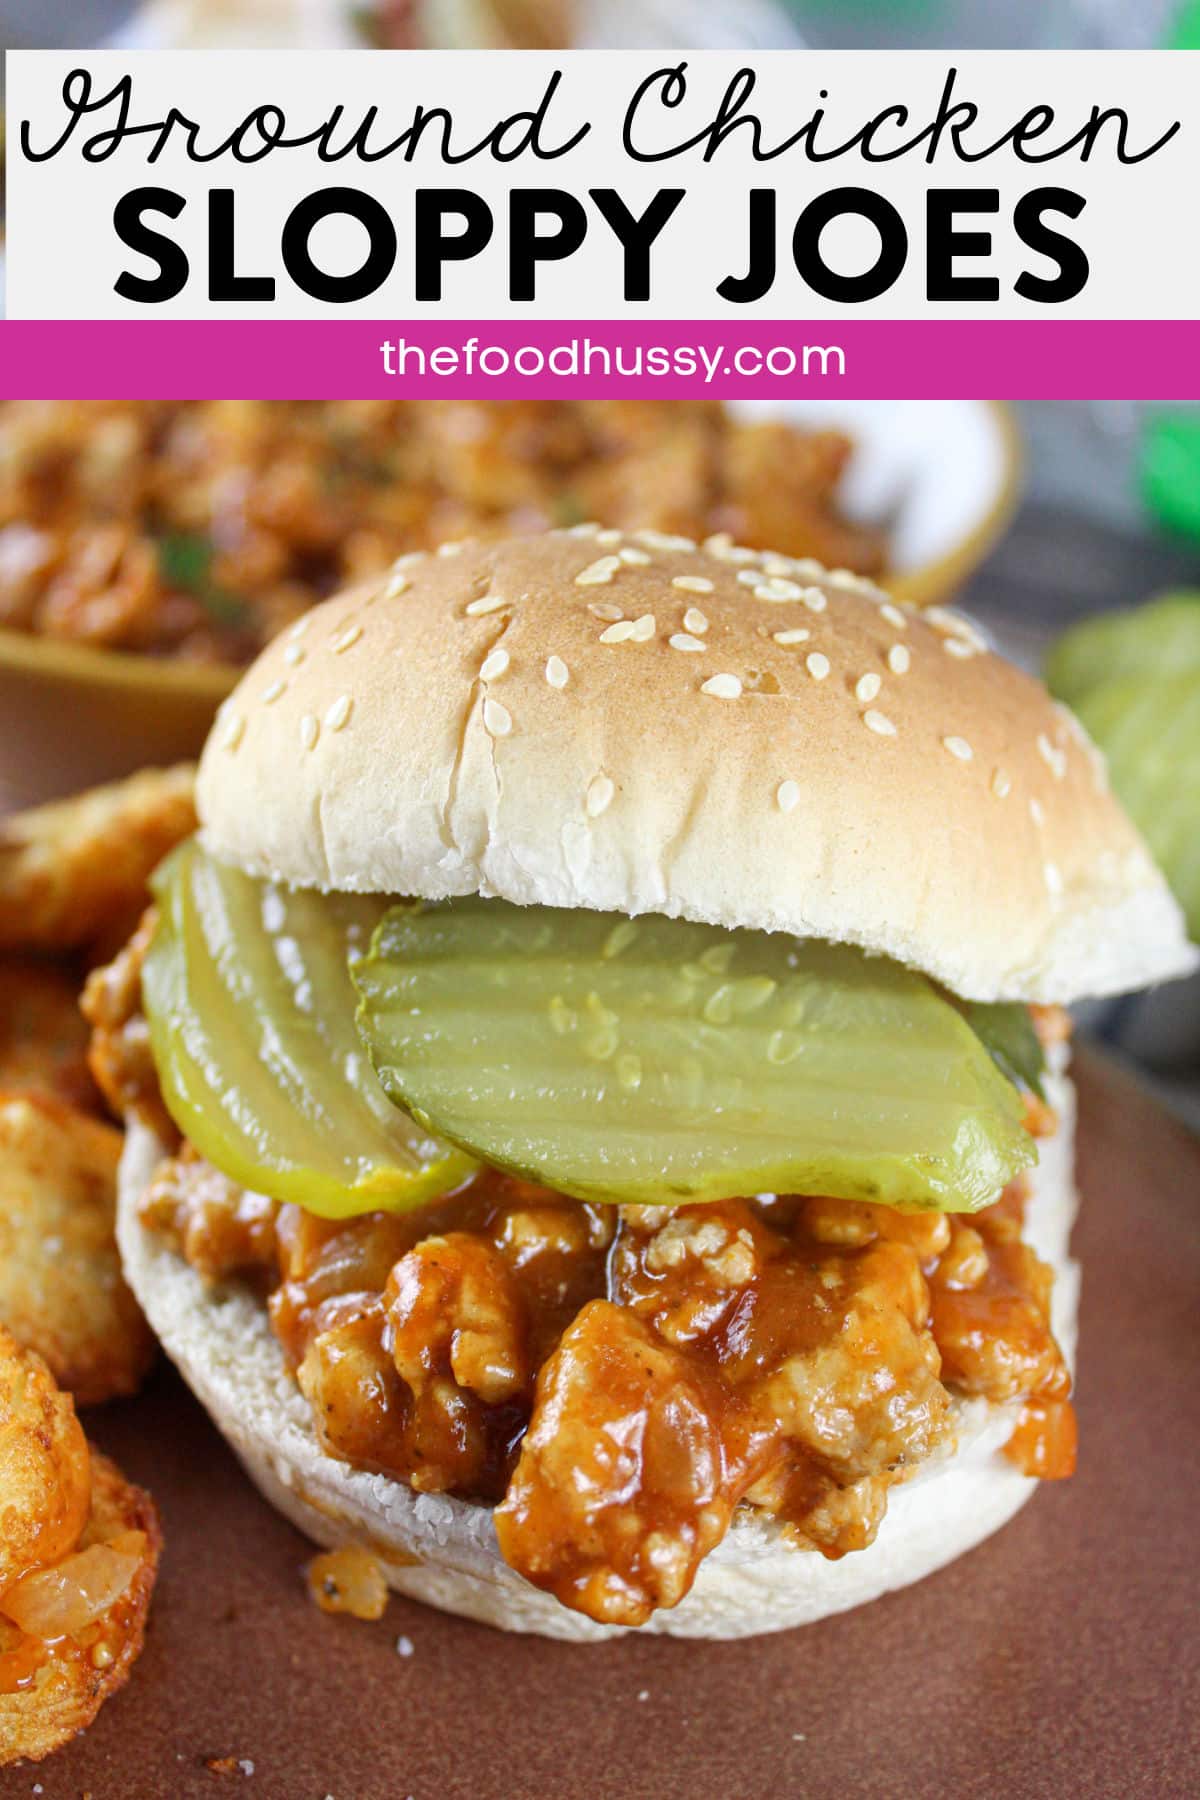 Sloppy Joes with Ground Chicken are sweet and tangy but have fewer calories than the traditional ground beef version! Bonus - they go from fridge to table in 15 minutes!  via @foodhussy